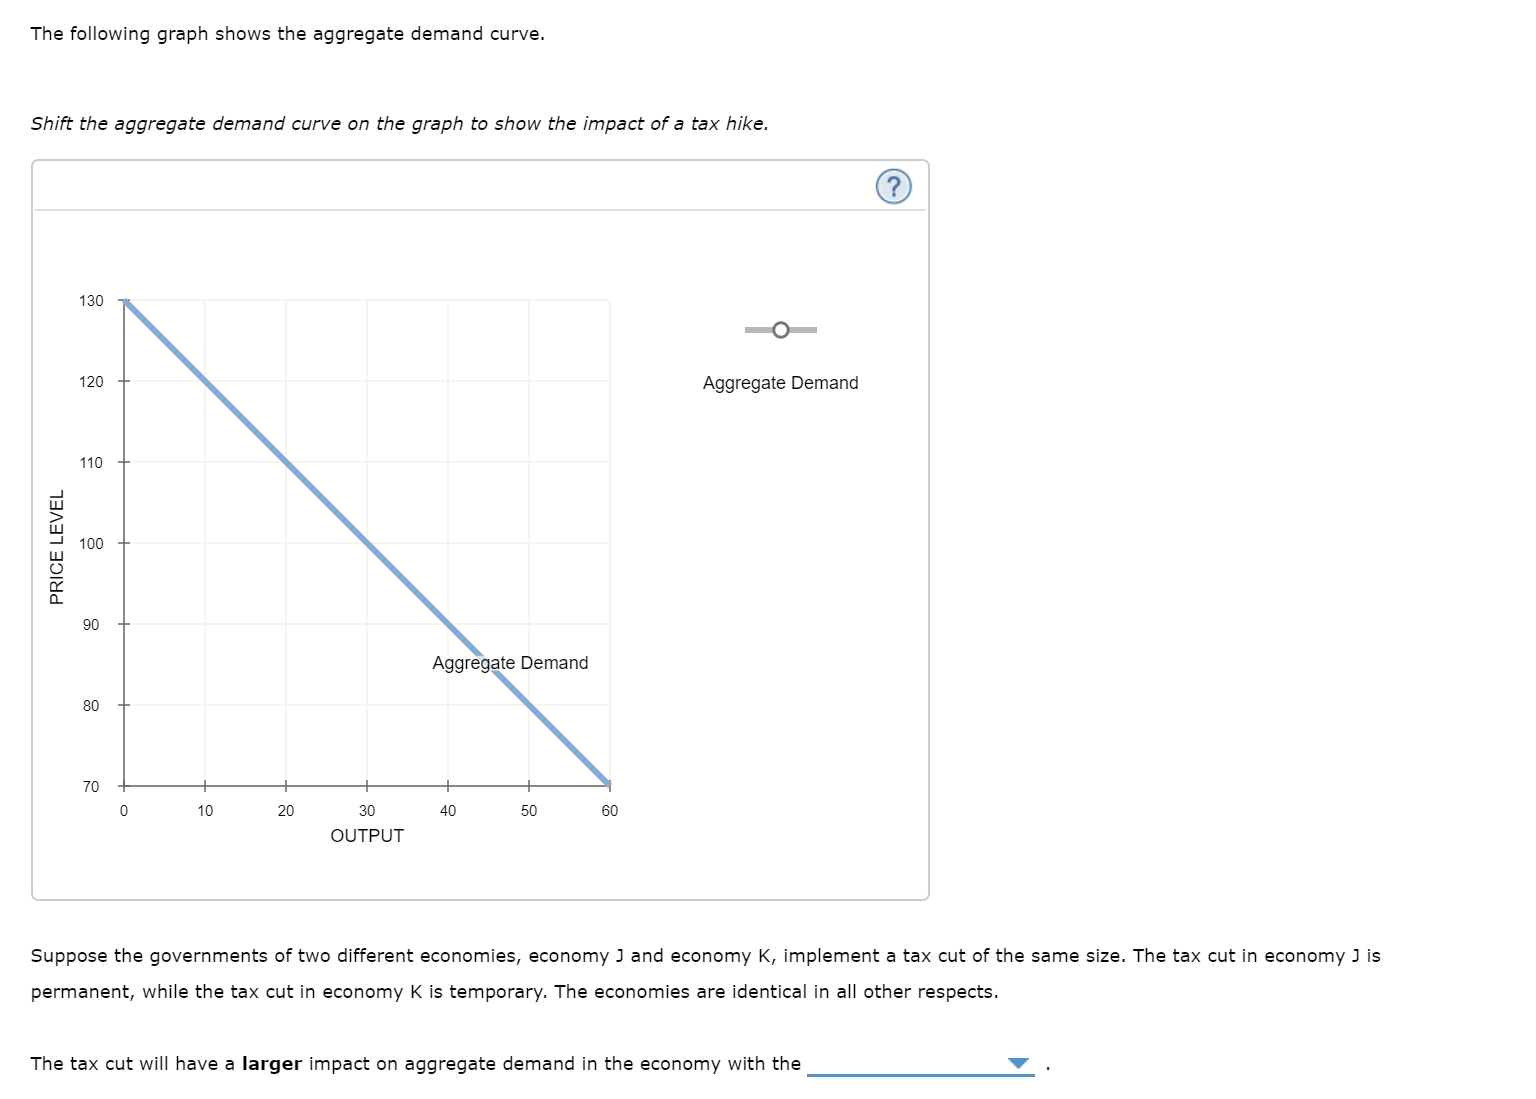 The following graph shows the aggregate demand curve.
Shift the aggregate demand curve on the graph to show the impact of a tax hike.
130
Aggregate Demand
120
110
100
90
Aggregate Demand
80
70
10
20
30
40
50
60
OUTPUT
Suppose the governments of two different economies, economy J and economy K, implement a tax cut of the same size. The tax cut in economy J is
permanent, while the tax cut in economy K is temporary. The economies are identical in all other respects.
The tax cut will have a larger impact on aggregate demand in the economy with the
PRICE LEVEL
